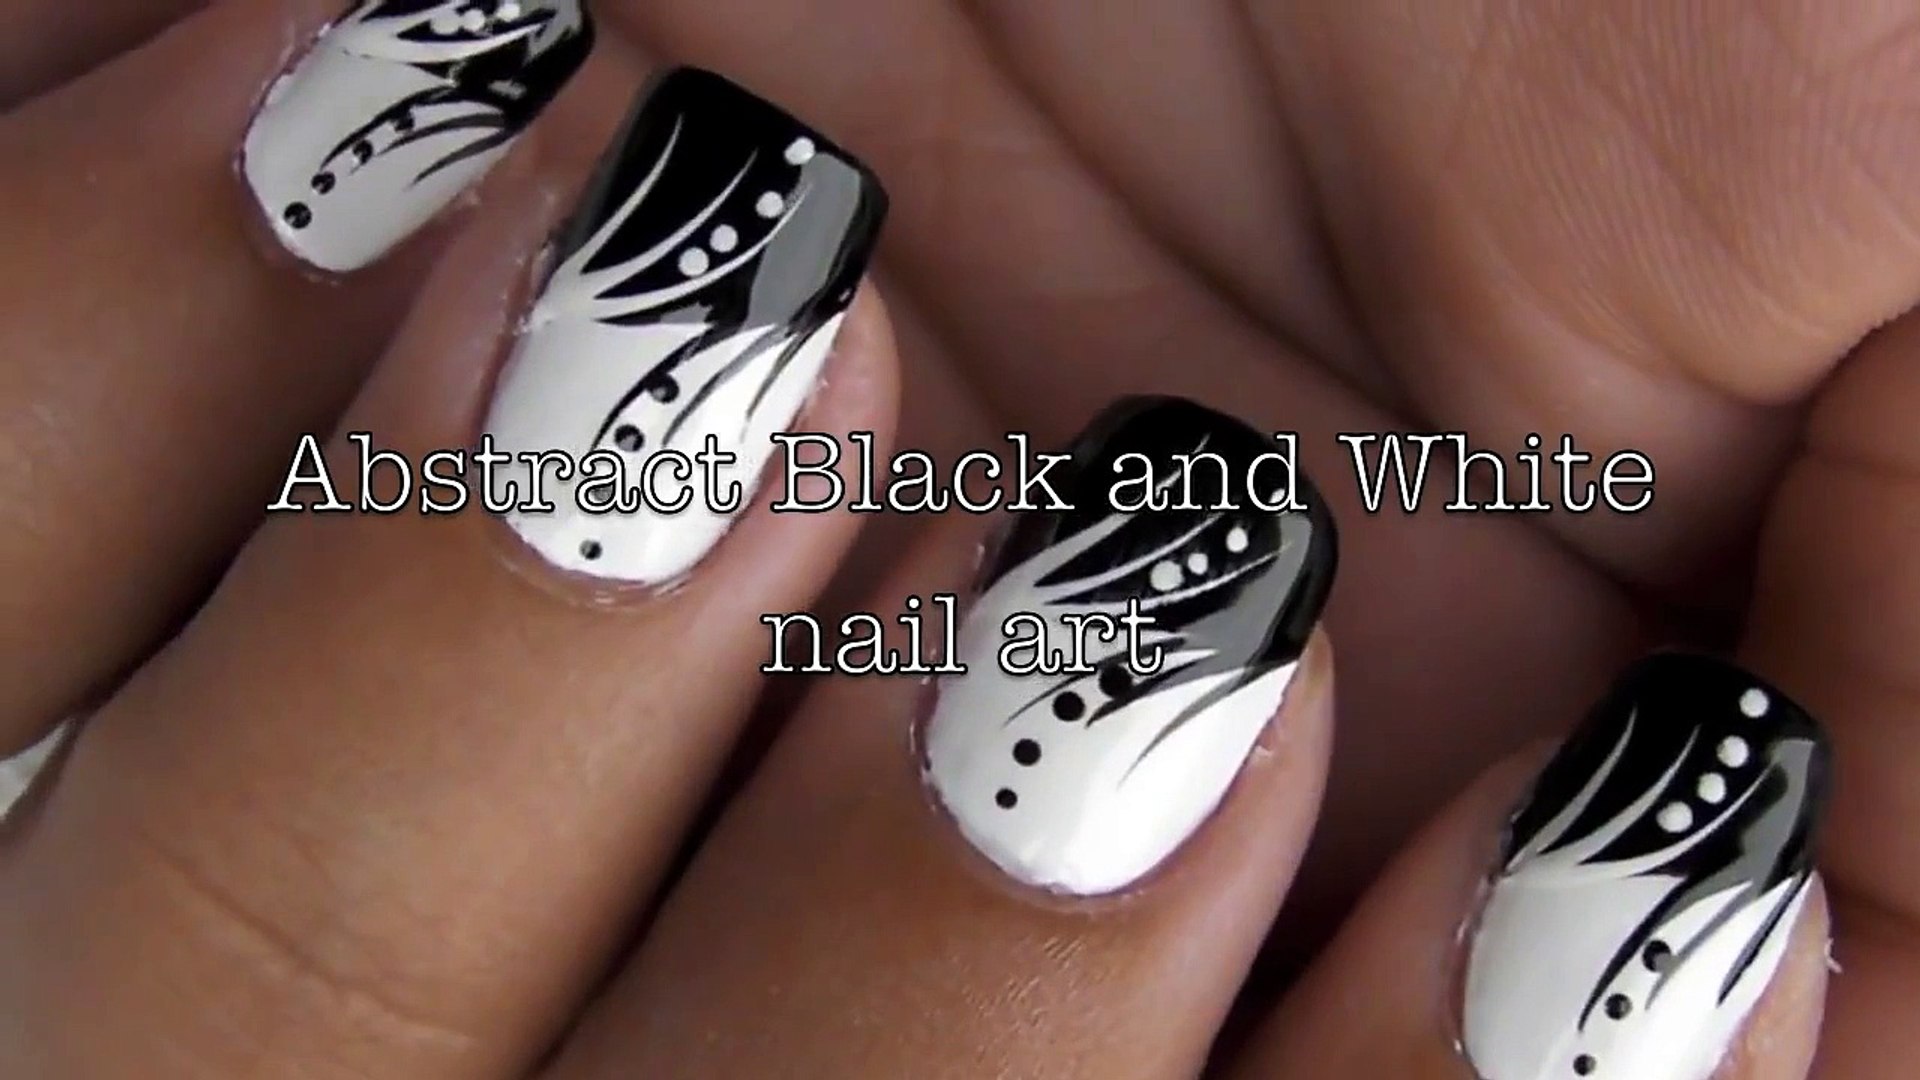 10. Black and White Nail Art Tutorial with Tape - wide 5